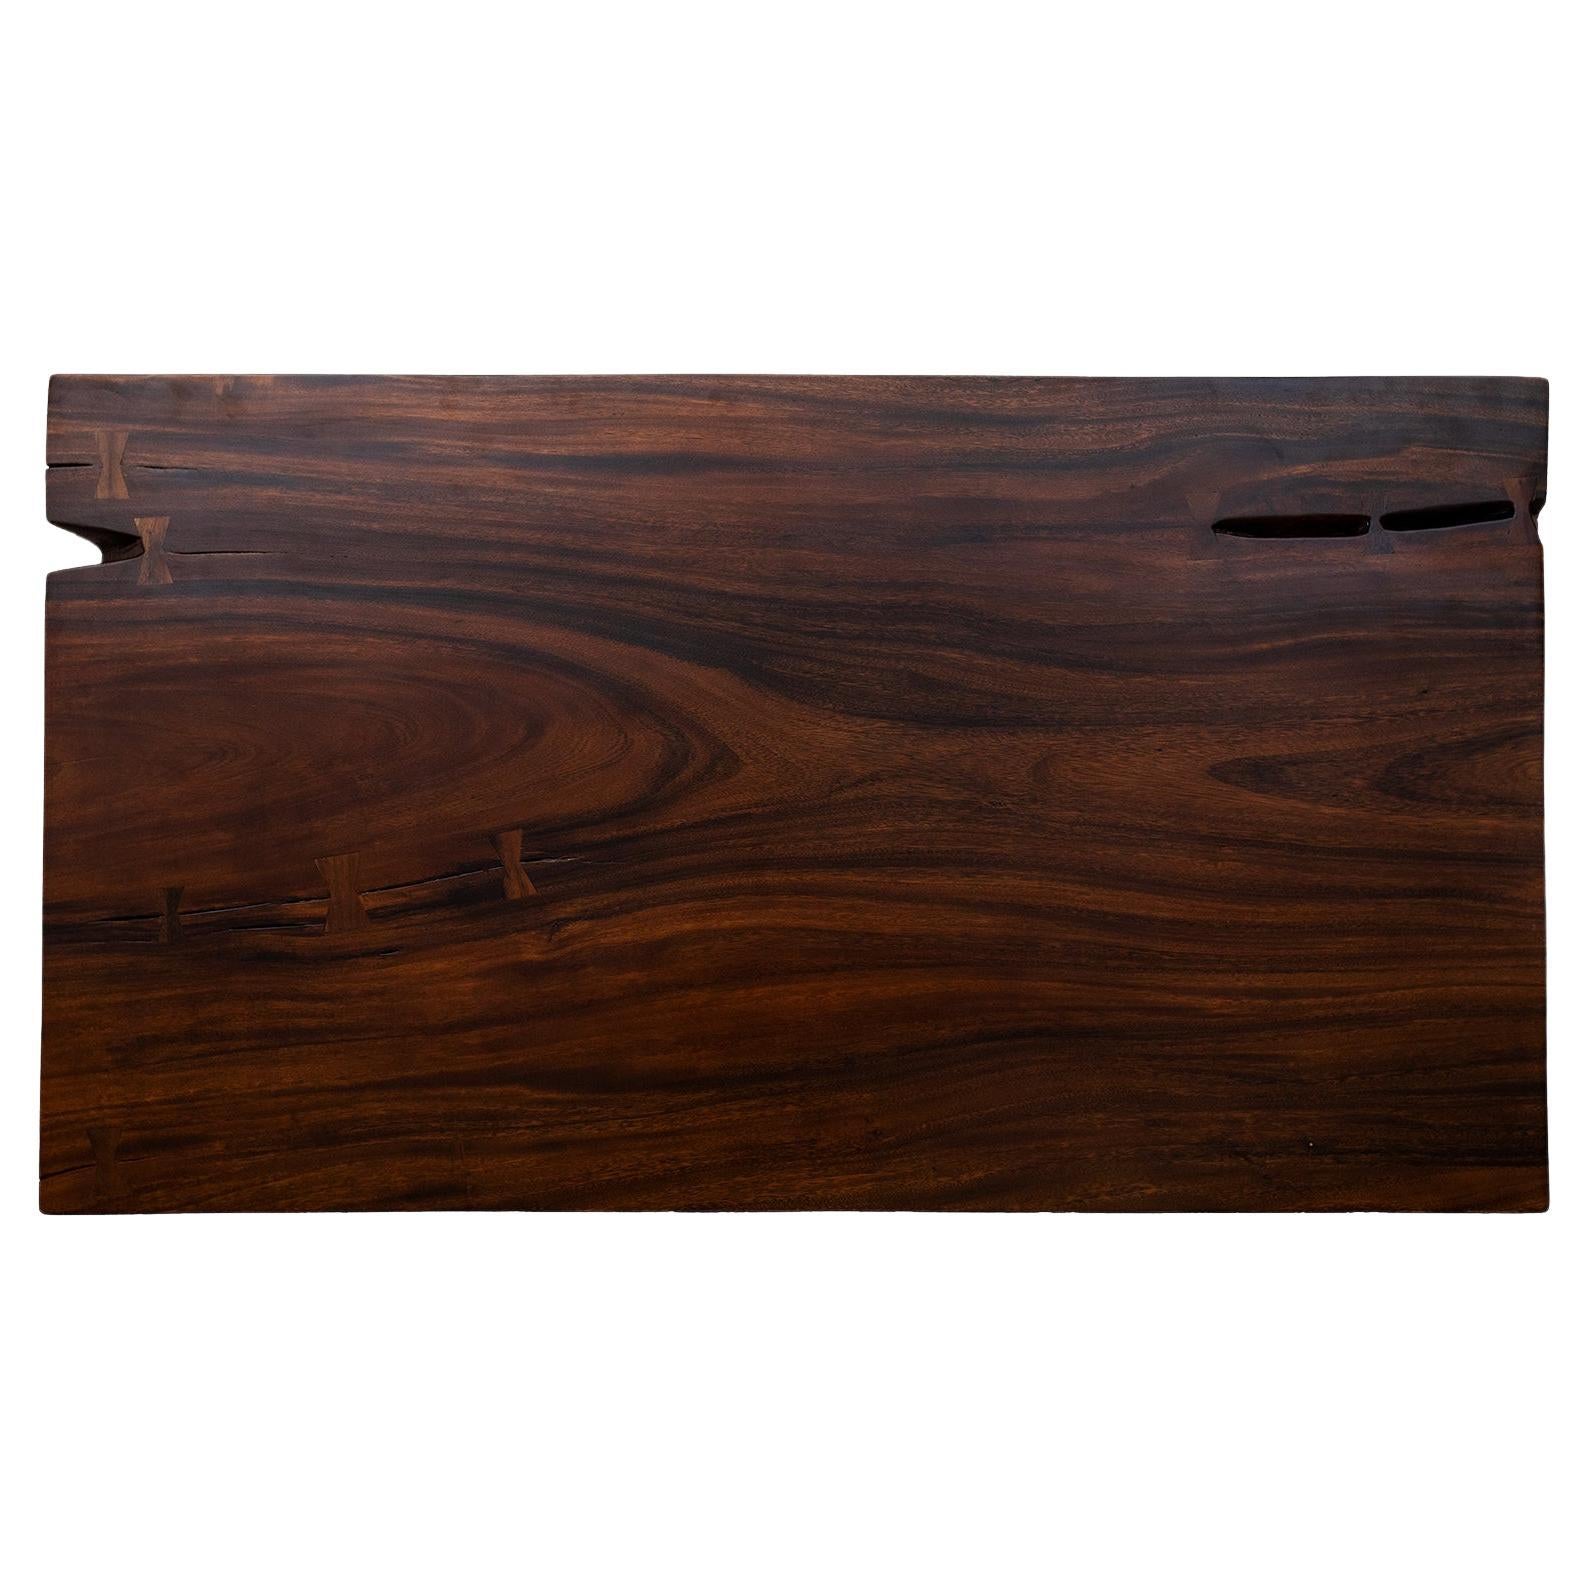 Acacia Mission Limited Edition Slab Table in Smooth Dark Chocolate For Sale